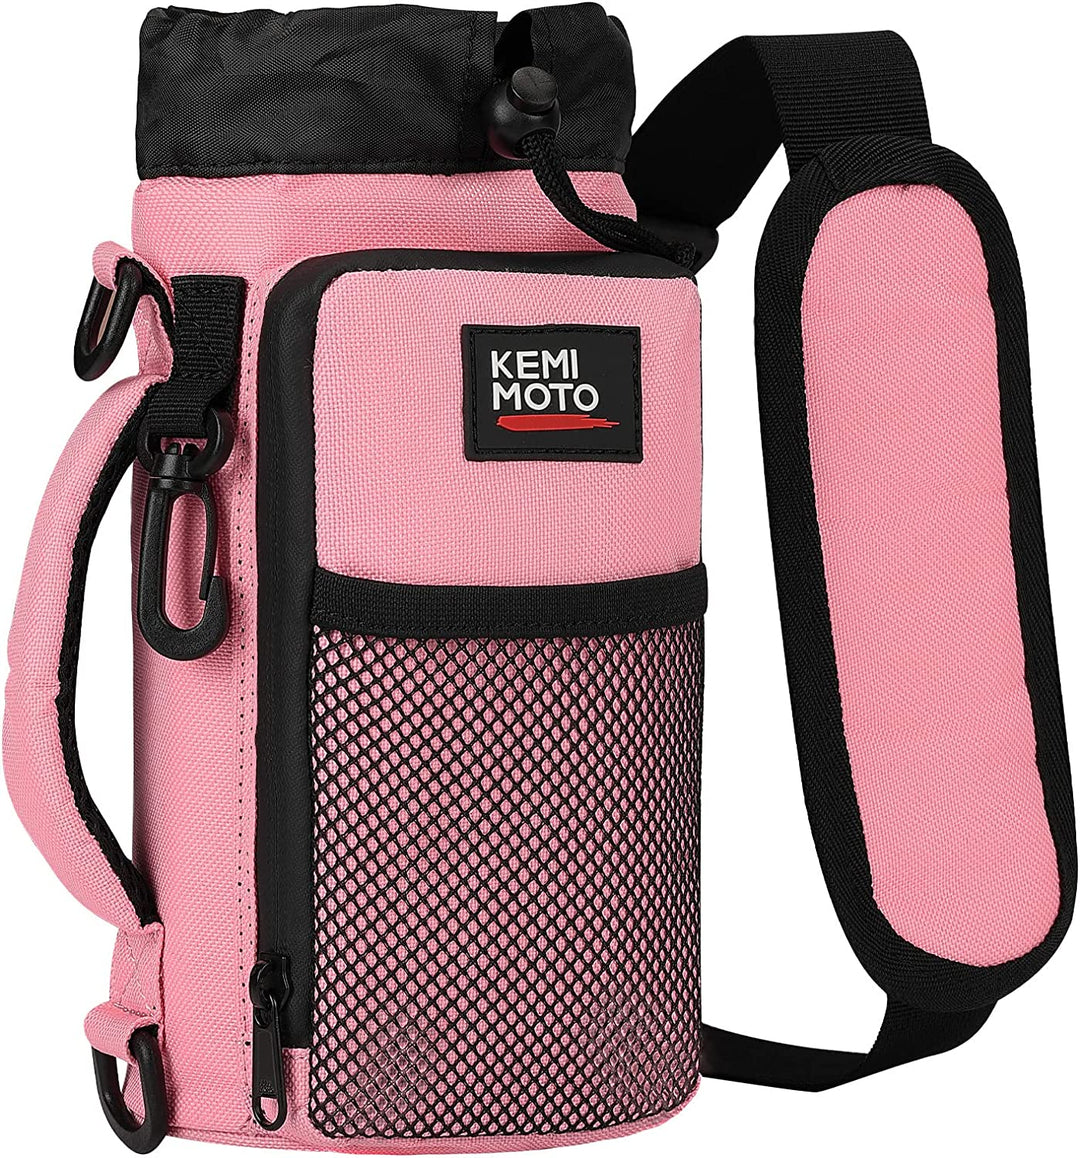 Waist Strap for Water Bottle Carriers, Holders & Tail-Along Pouch